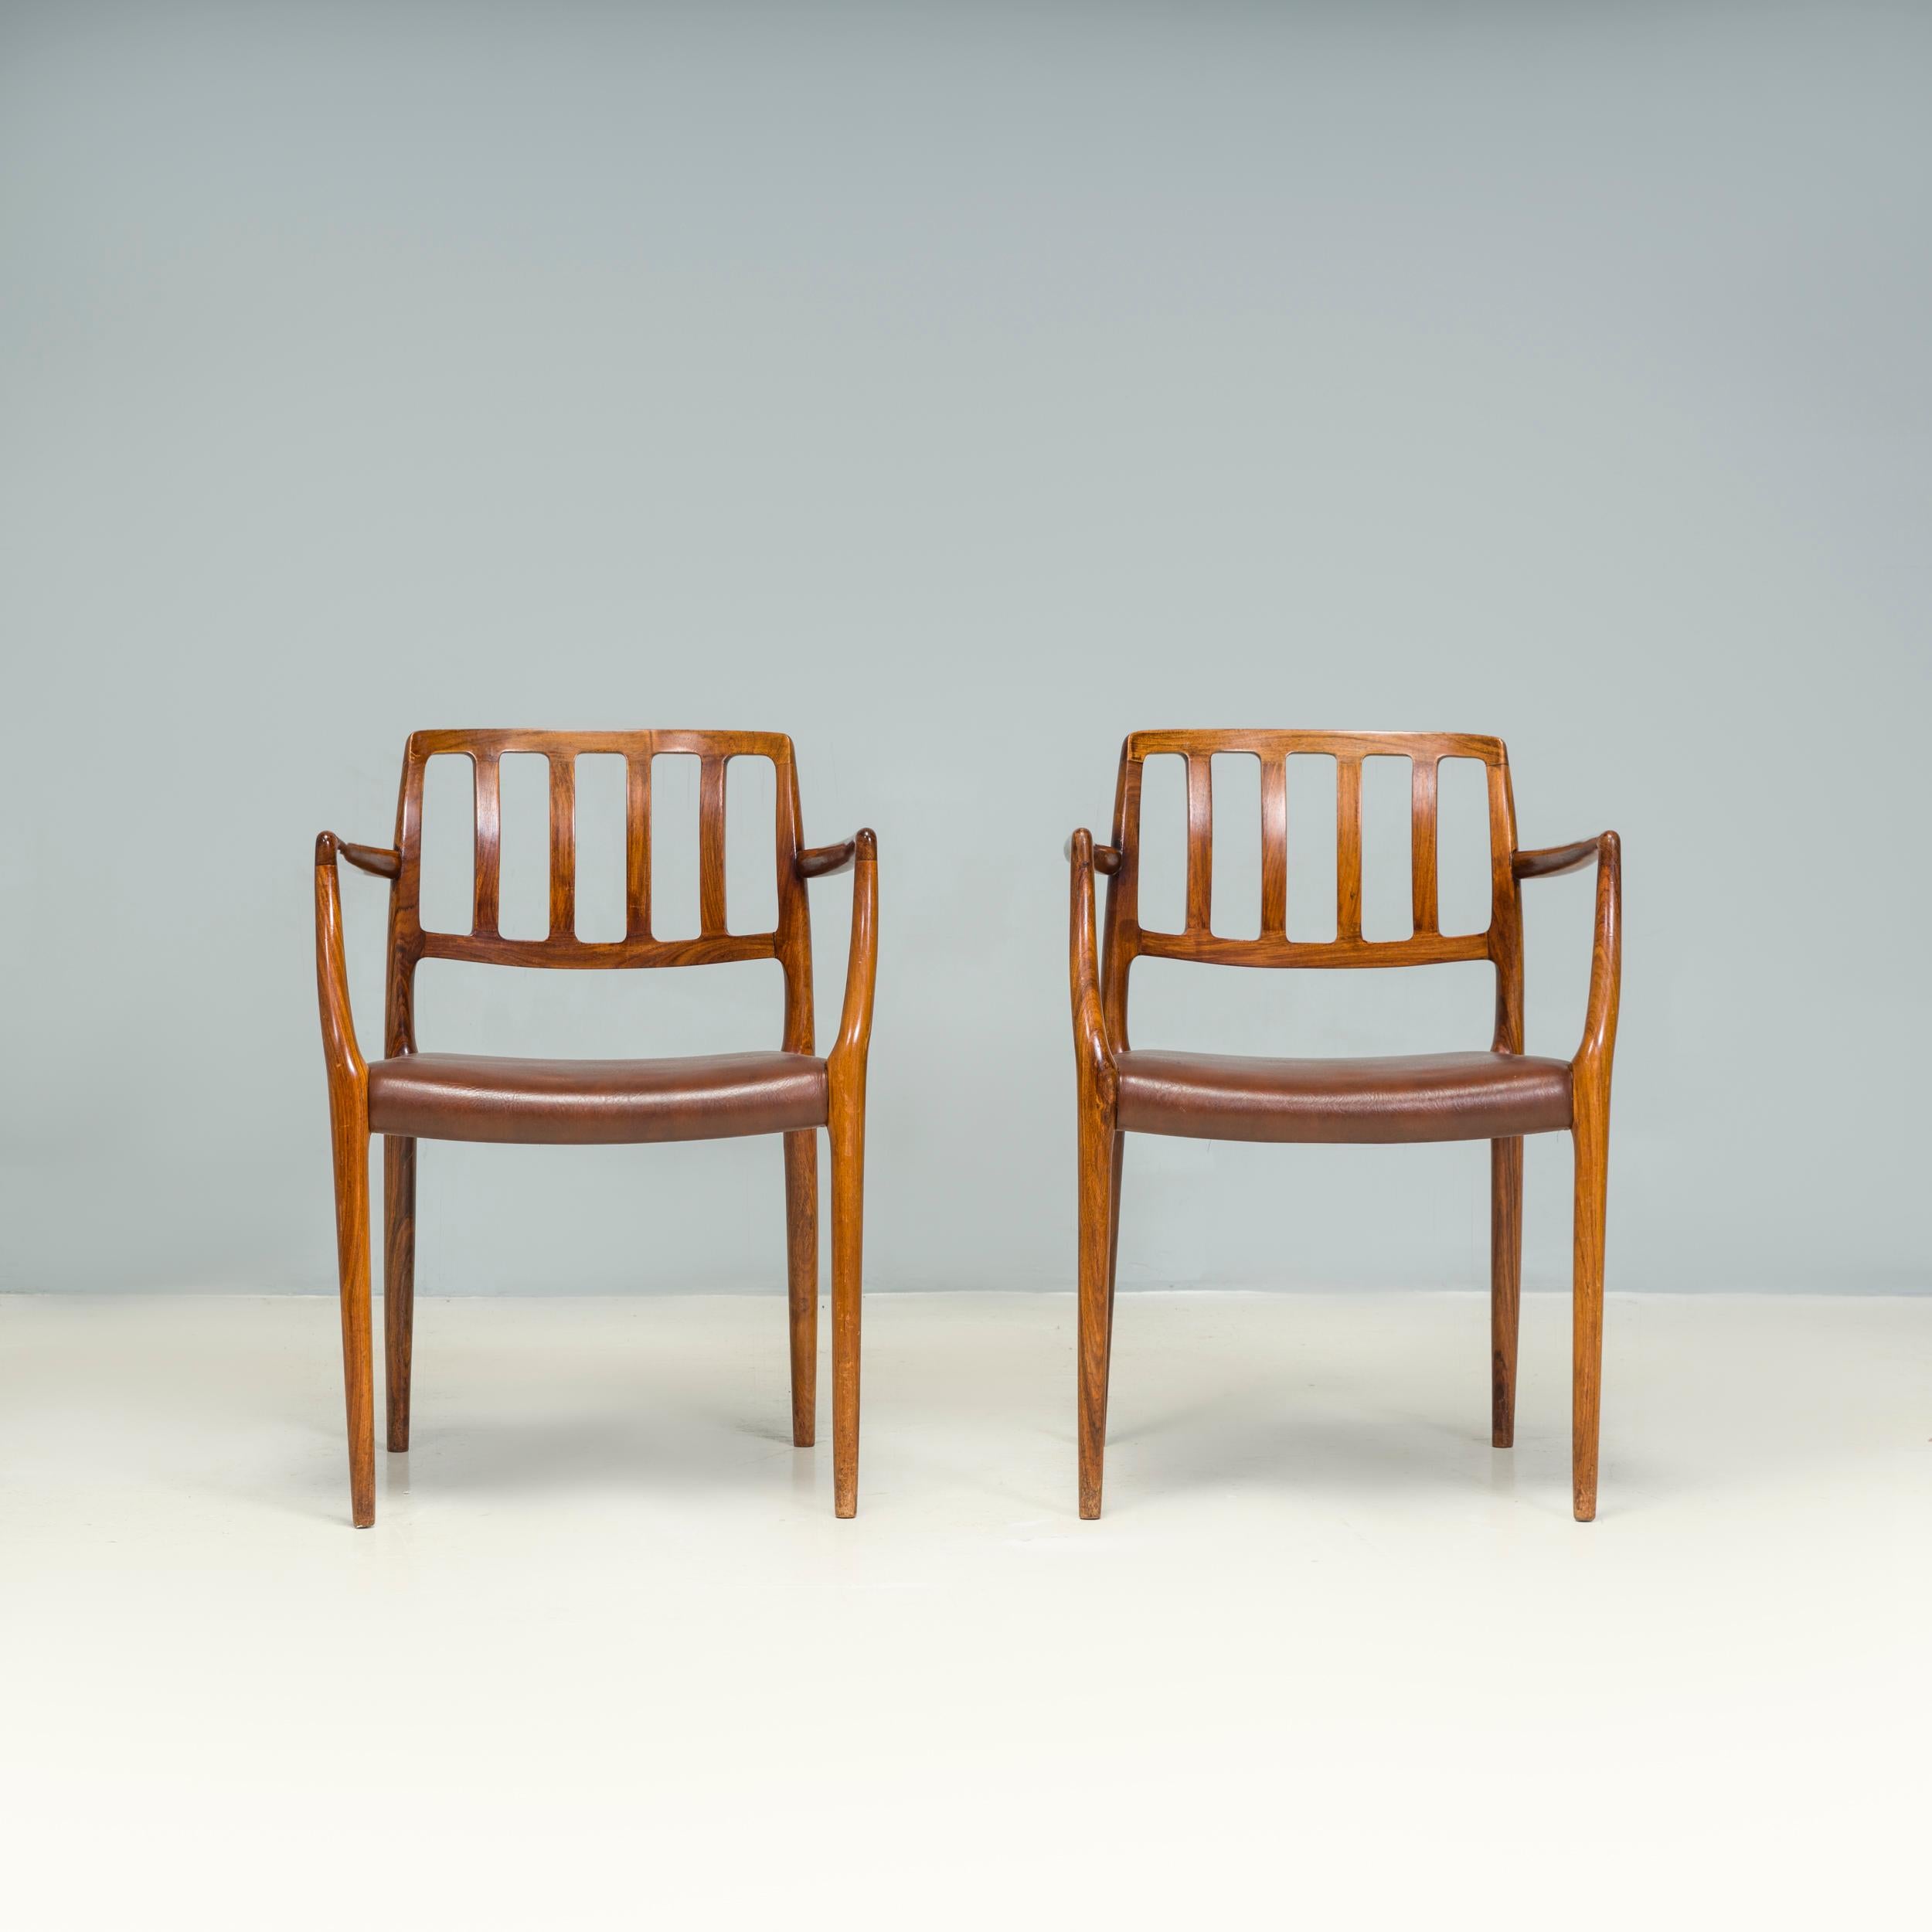 Originally designed by Niels Otto Møller in 1974, the #66 Chair was one of the most complicated designs that the company had produced.

The dining chairs feature a beautifully carved wooden frame, in a glossy finish to highlight the natural grain of